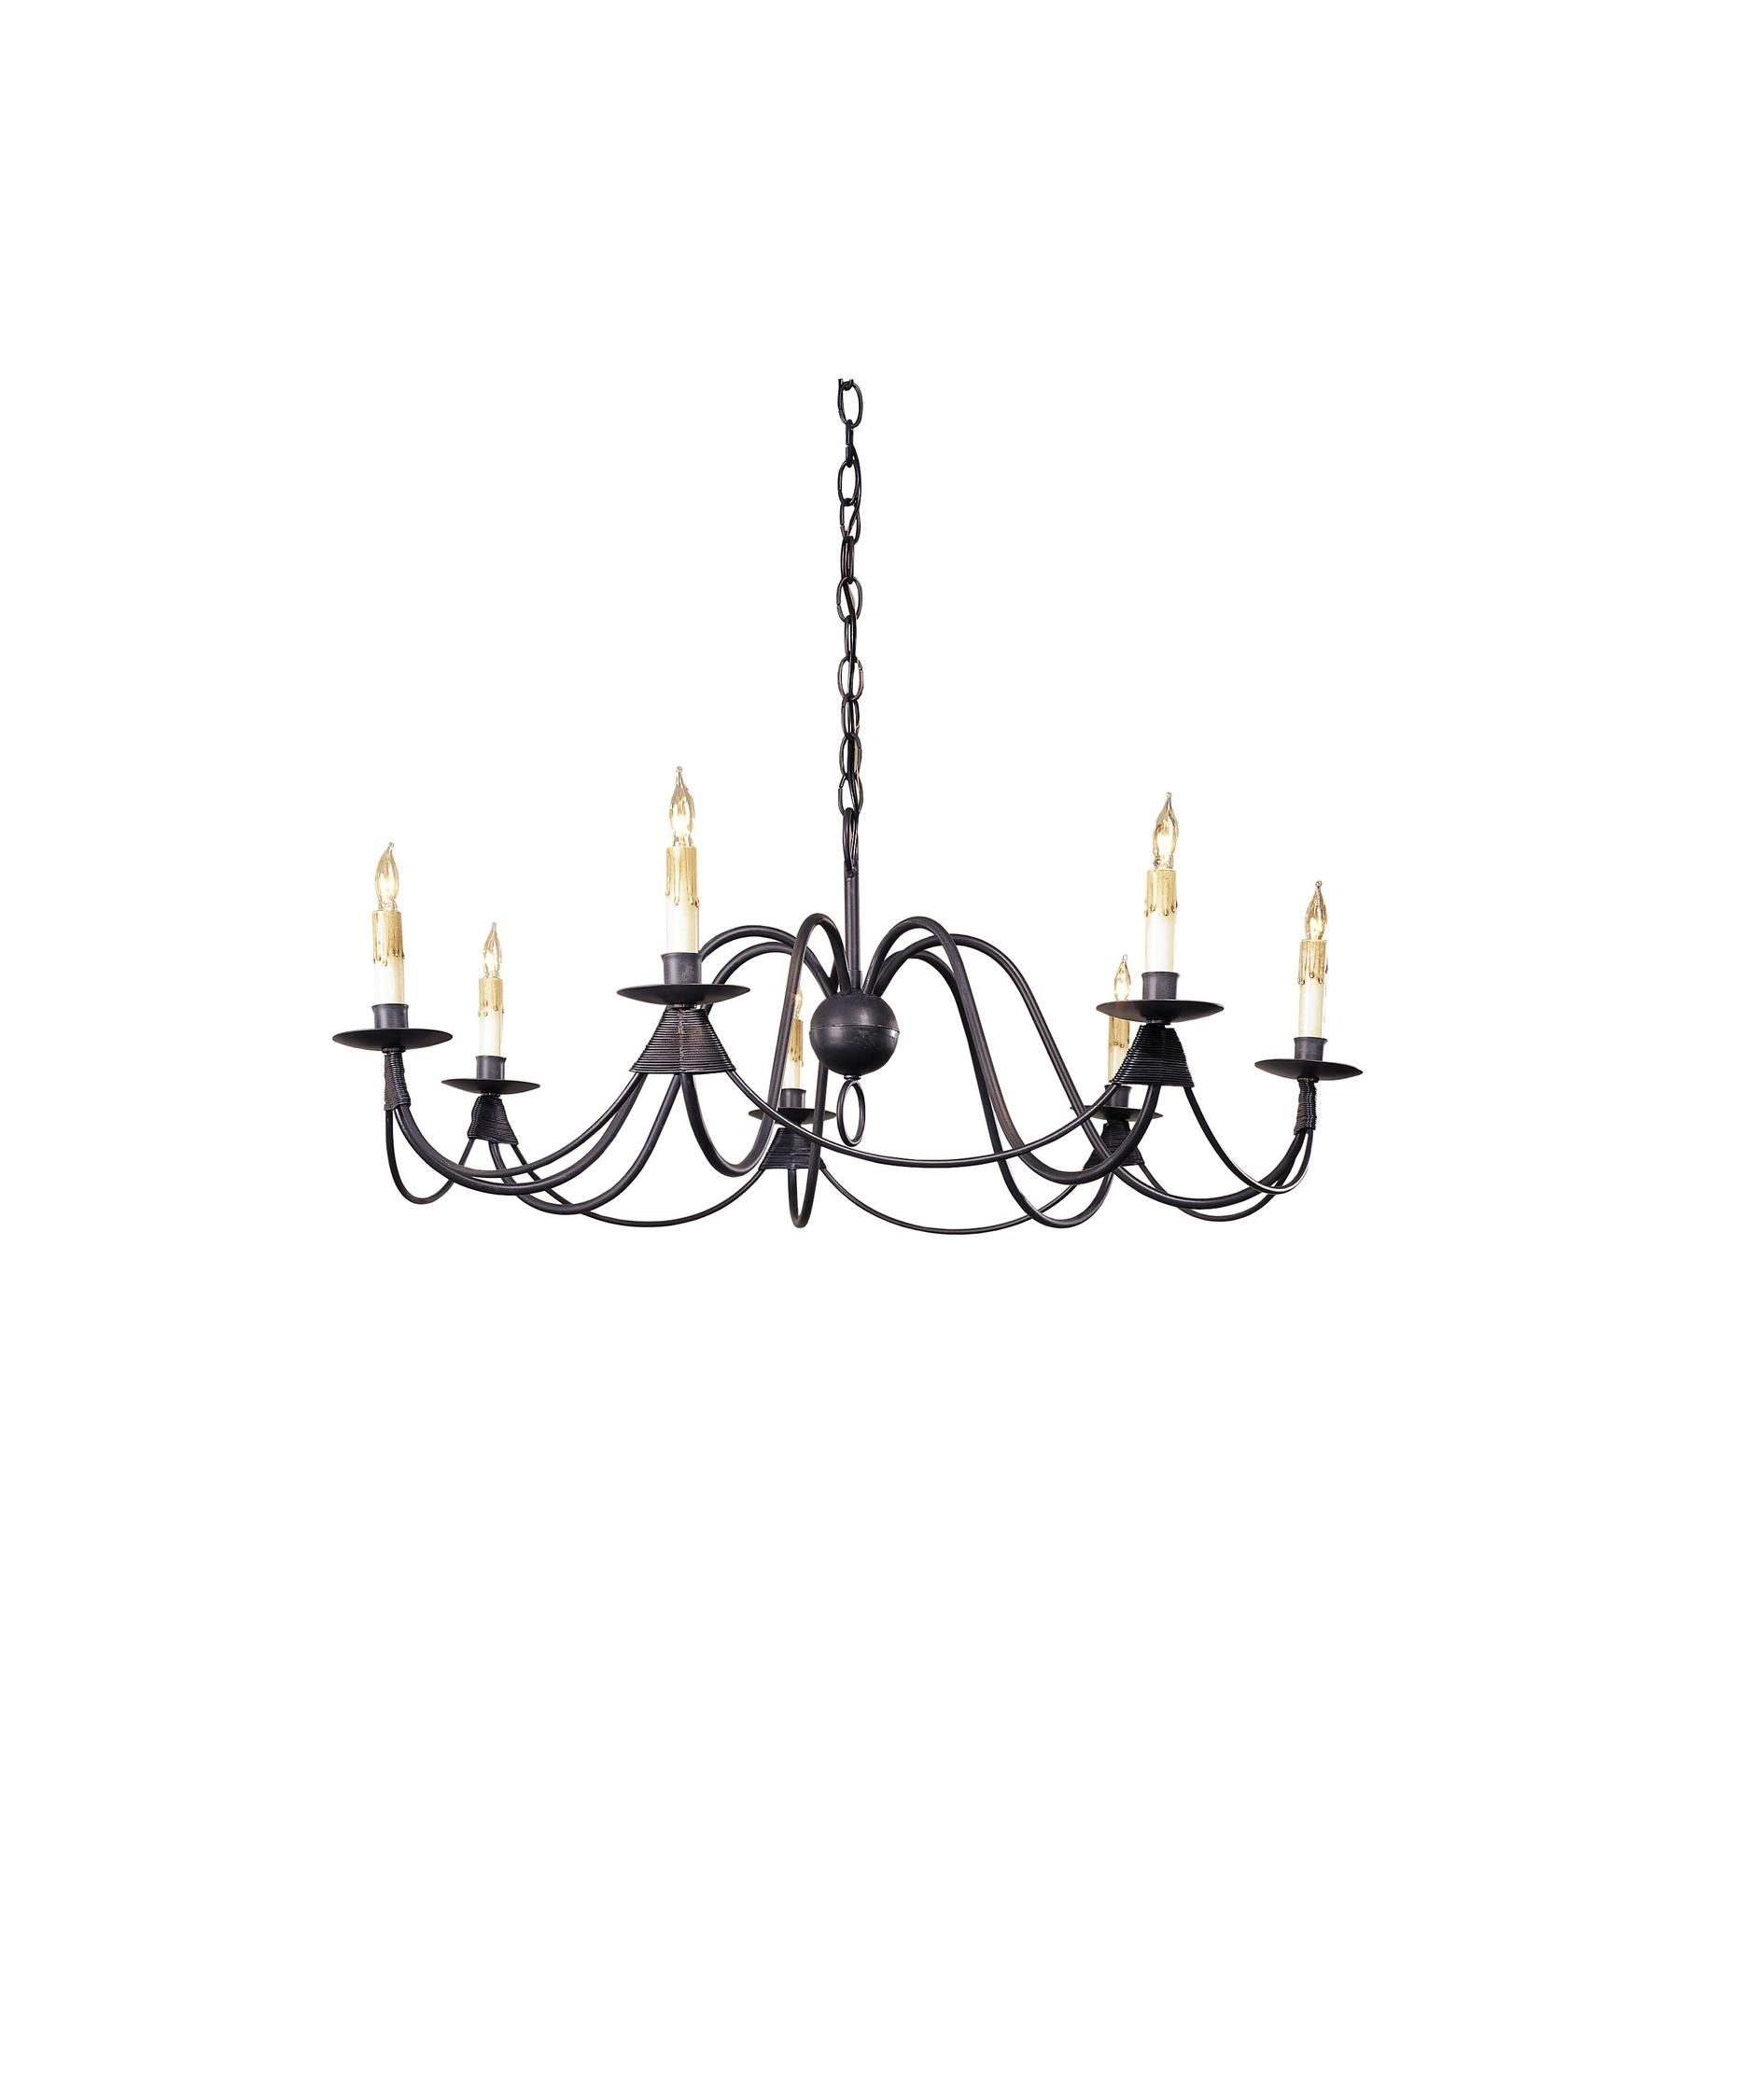 Currey And Company 9500 French Nouveau 32 Inch Wide 7 Light Pertaining To 7 Light Chandeliers (View 22 of 25)